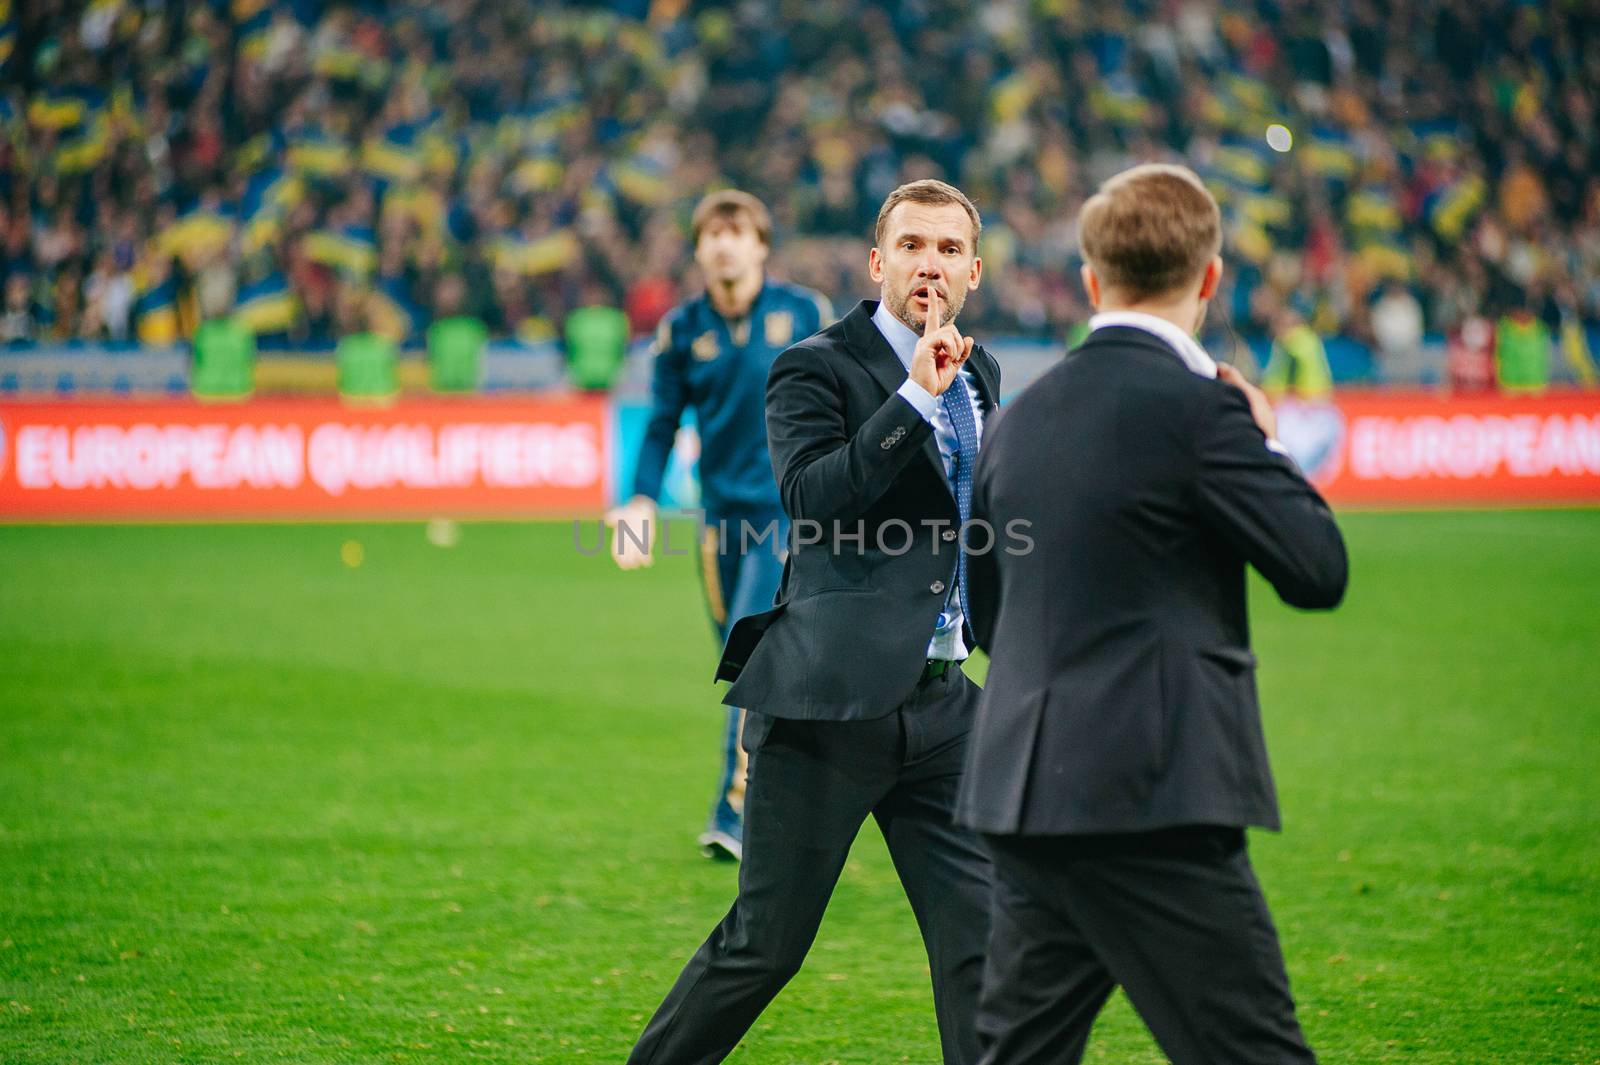 Kyiv, Ukraine - October 14, 2019: Andriy Shevchenko, head coach (manager) of Ukraine national football team after match of the qualifying EURO 2020 vs Portugal at the Olympic Stadium